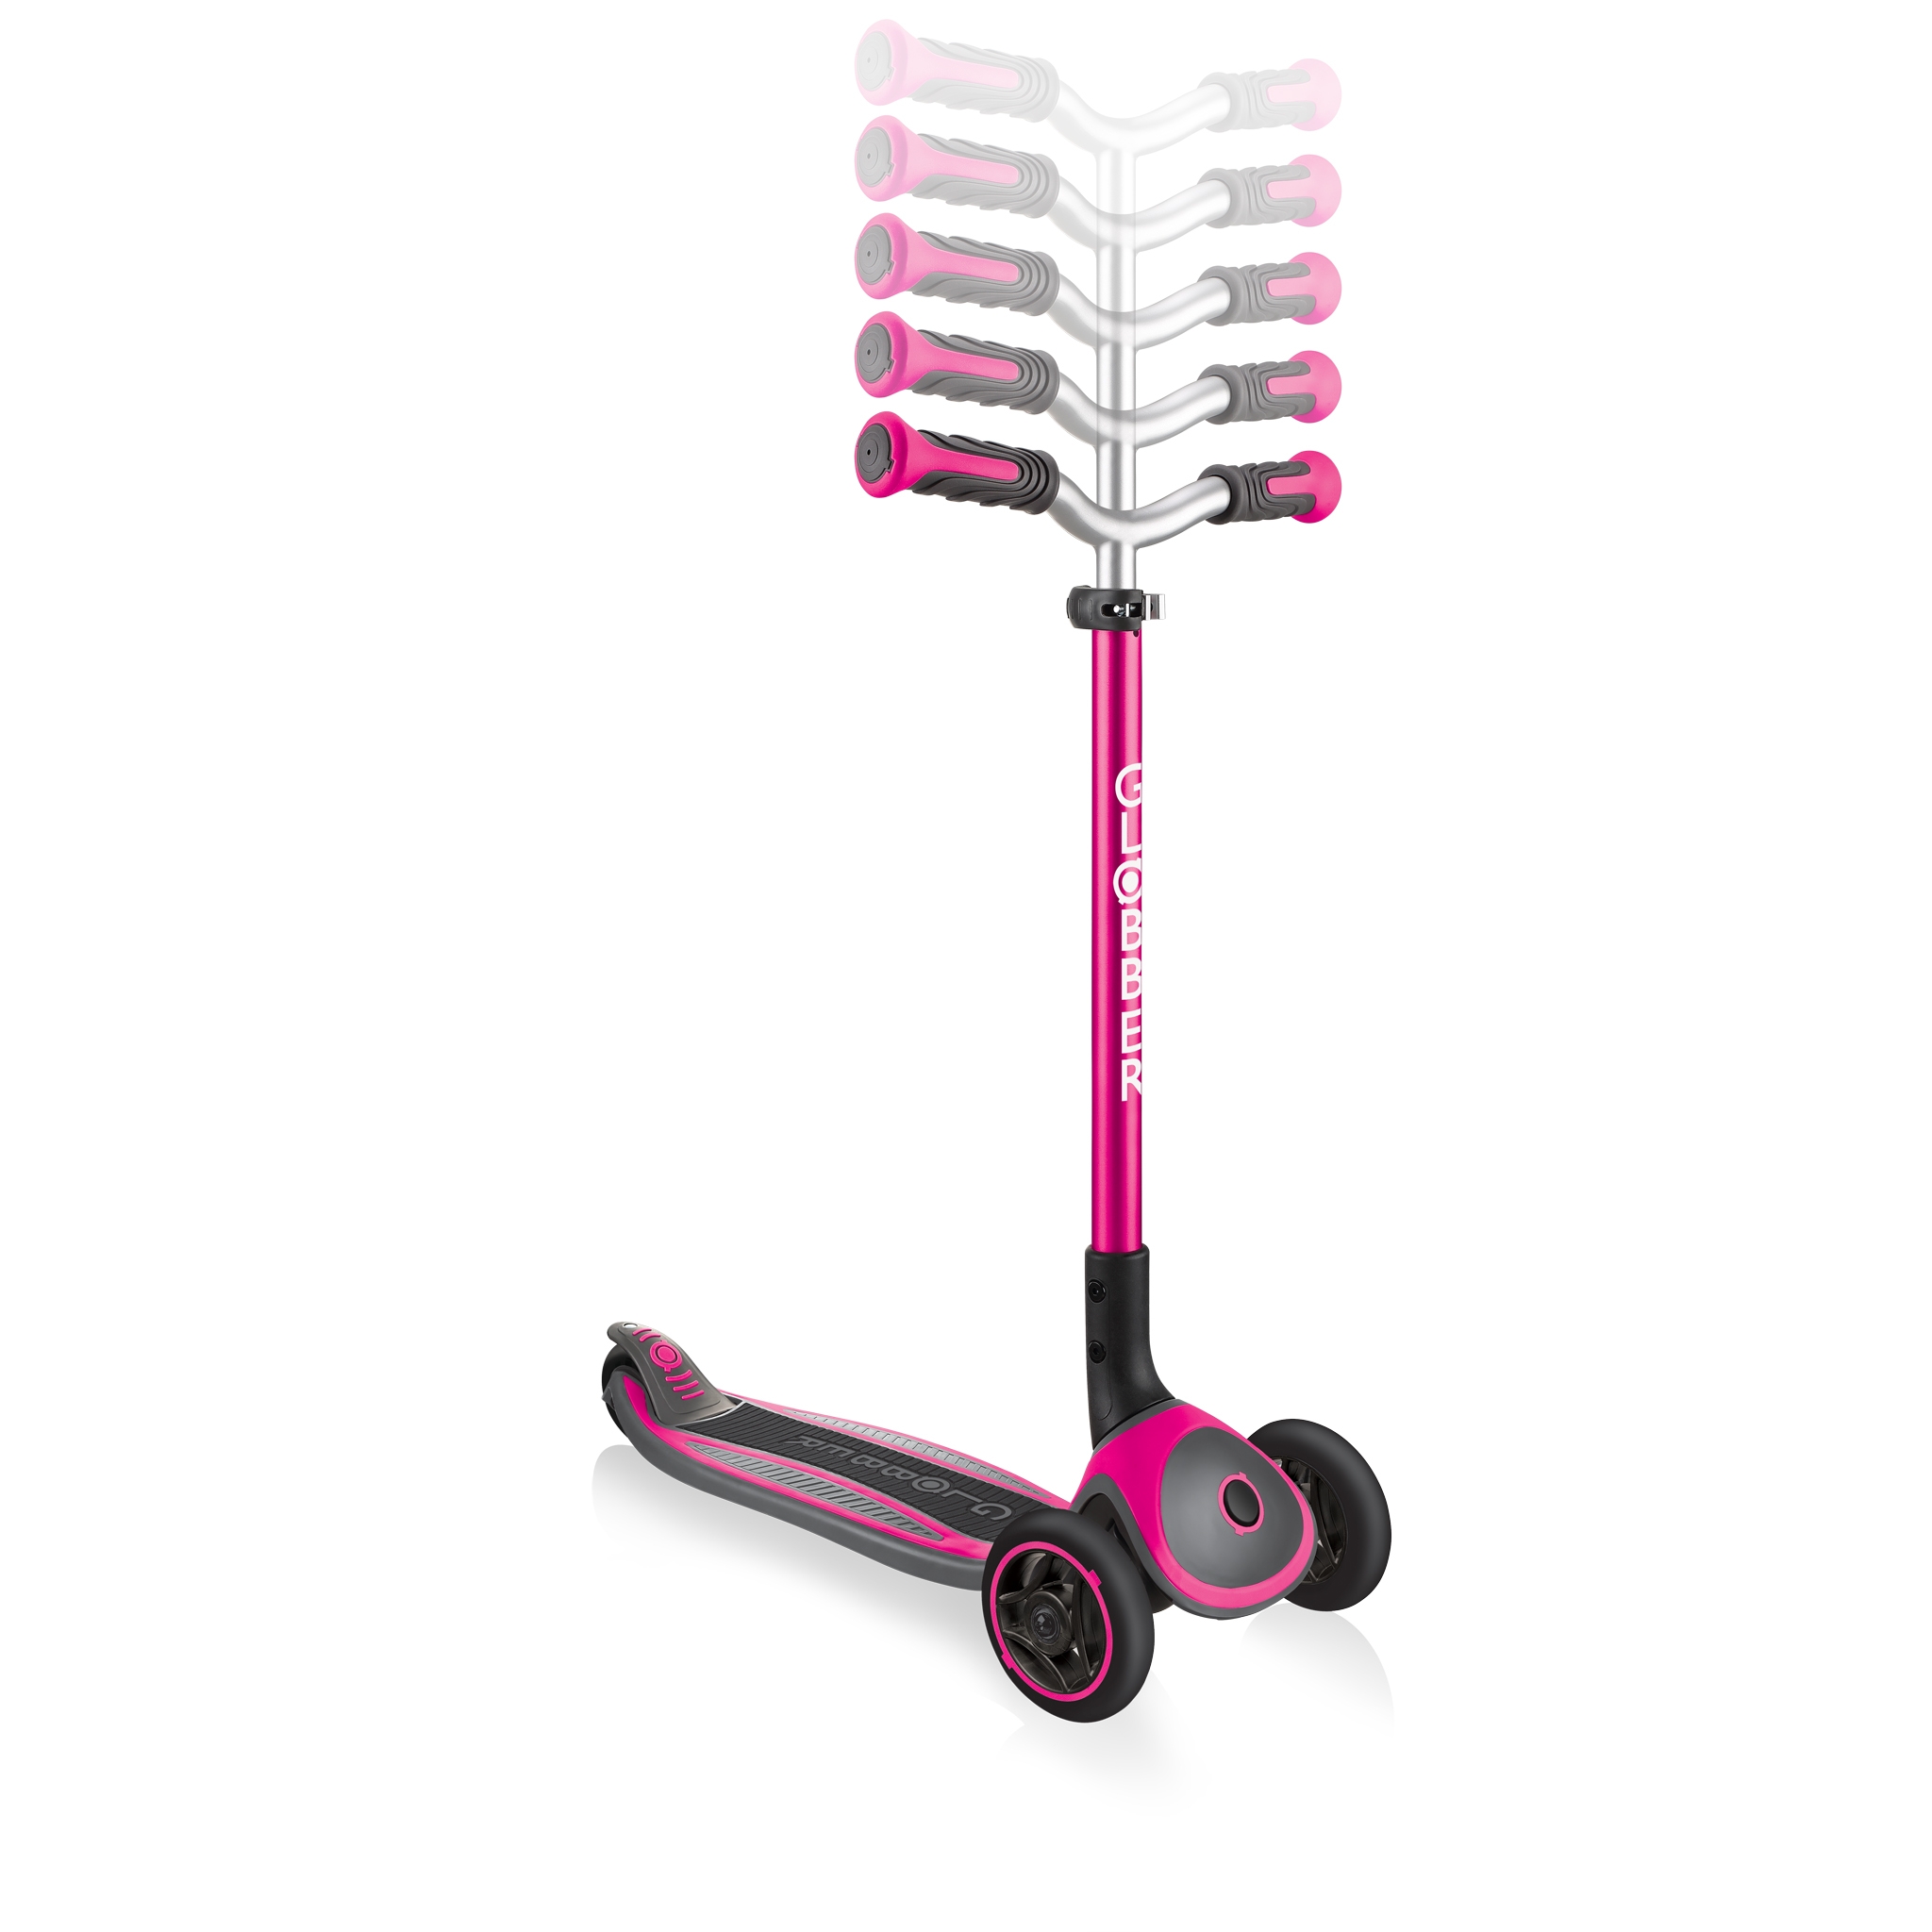 Globber-MASTER-premium-3-wheel-foldable-scooters-for-kids-with-5-height-adjustable-T-bar_deep-pink 4